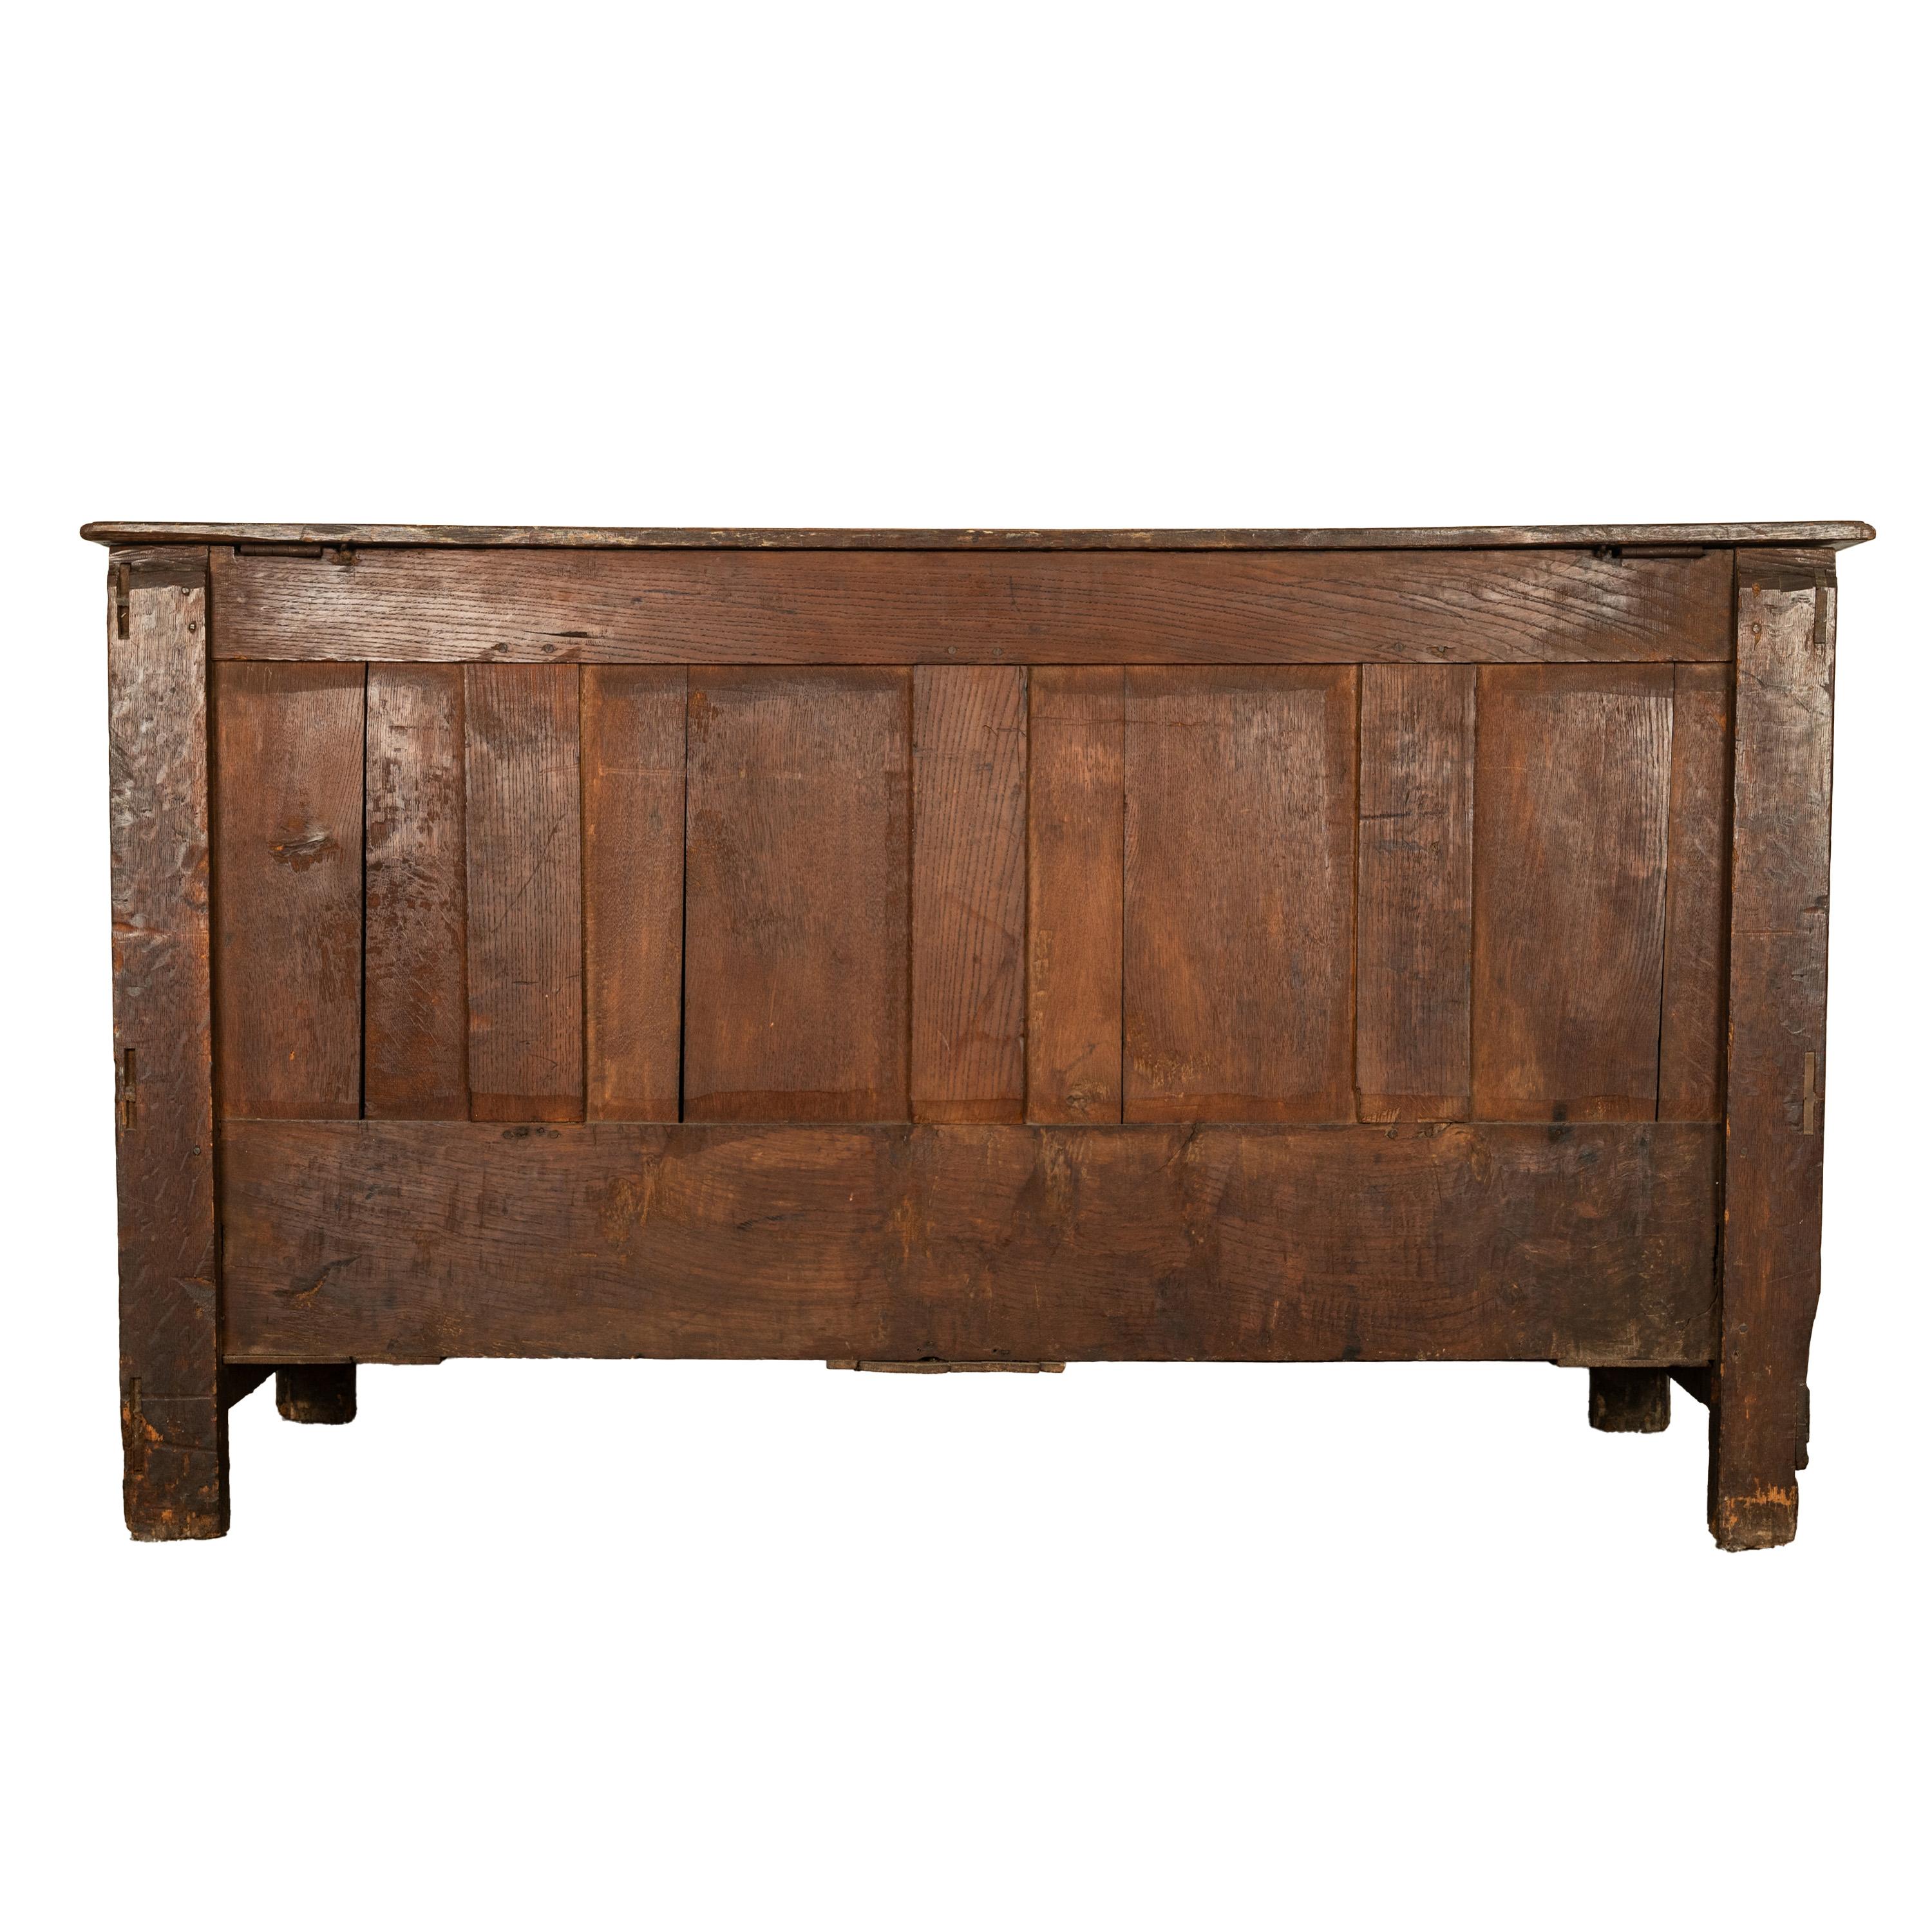 Monumental Antique Georgian Joined Oak Mule Dowry Chest Coffer Yorkshire 1720 For Sale 10